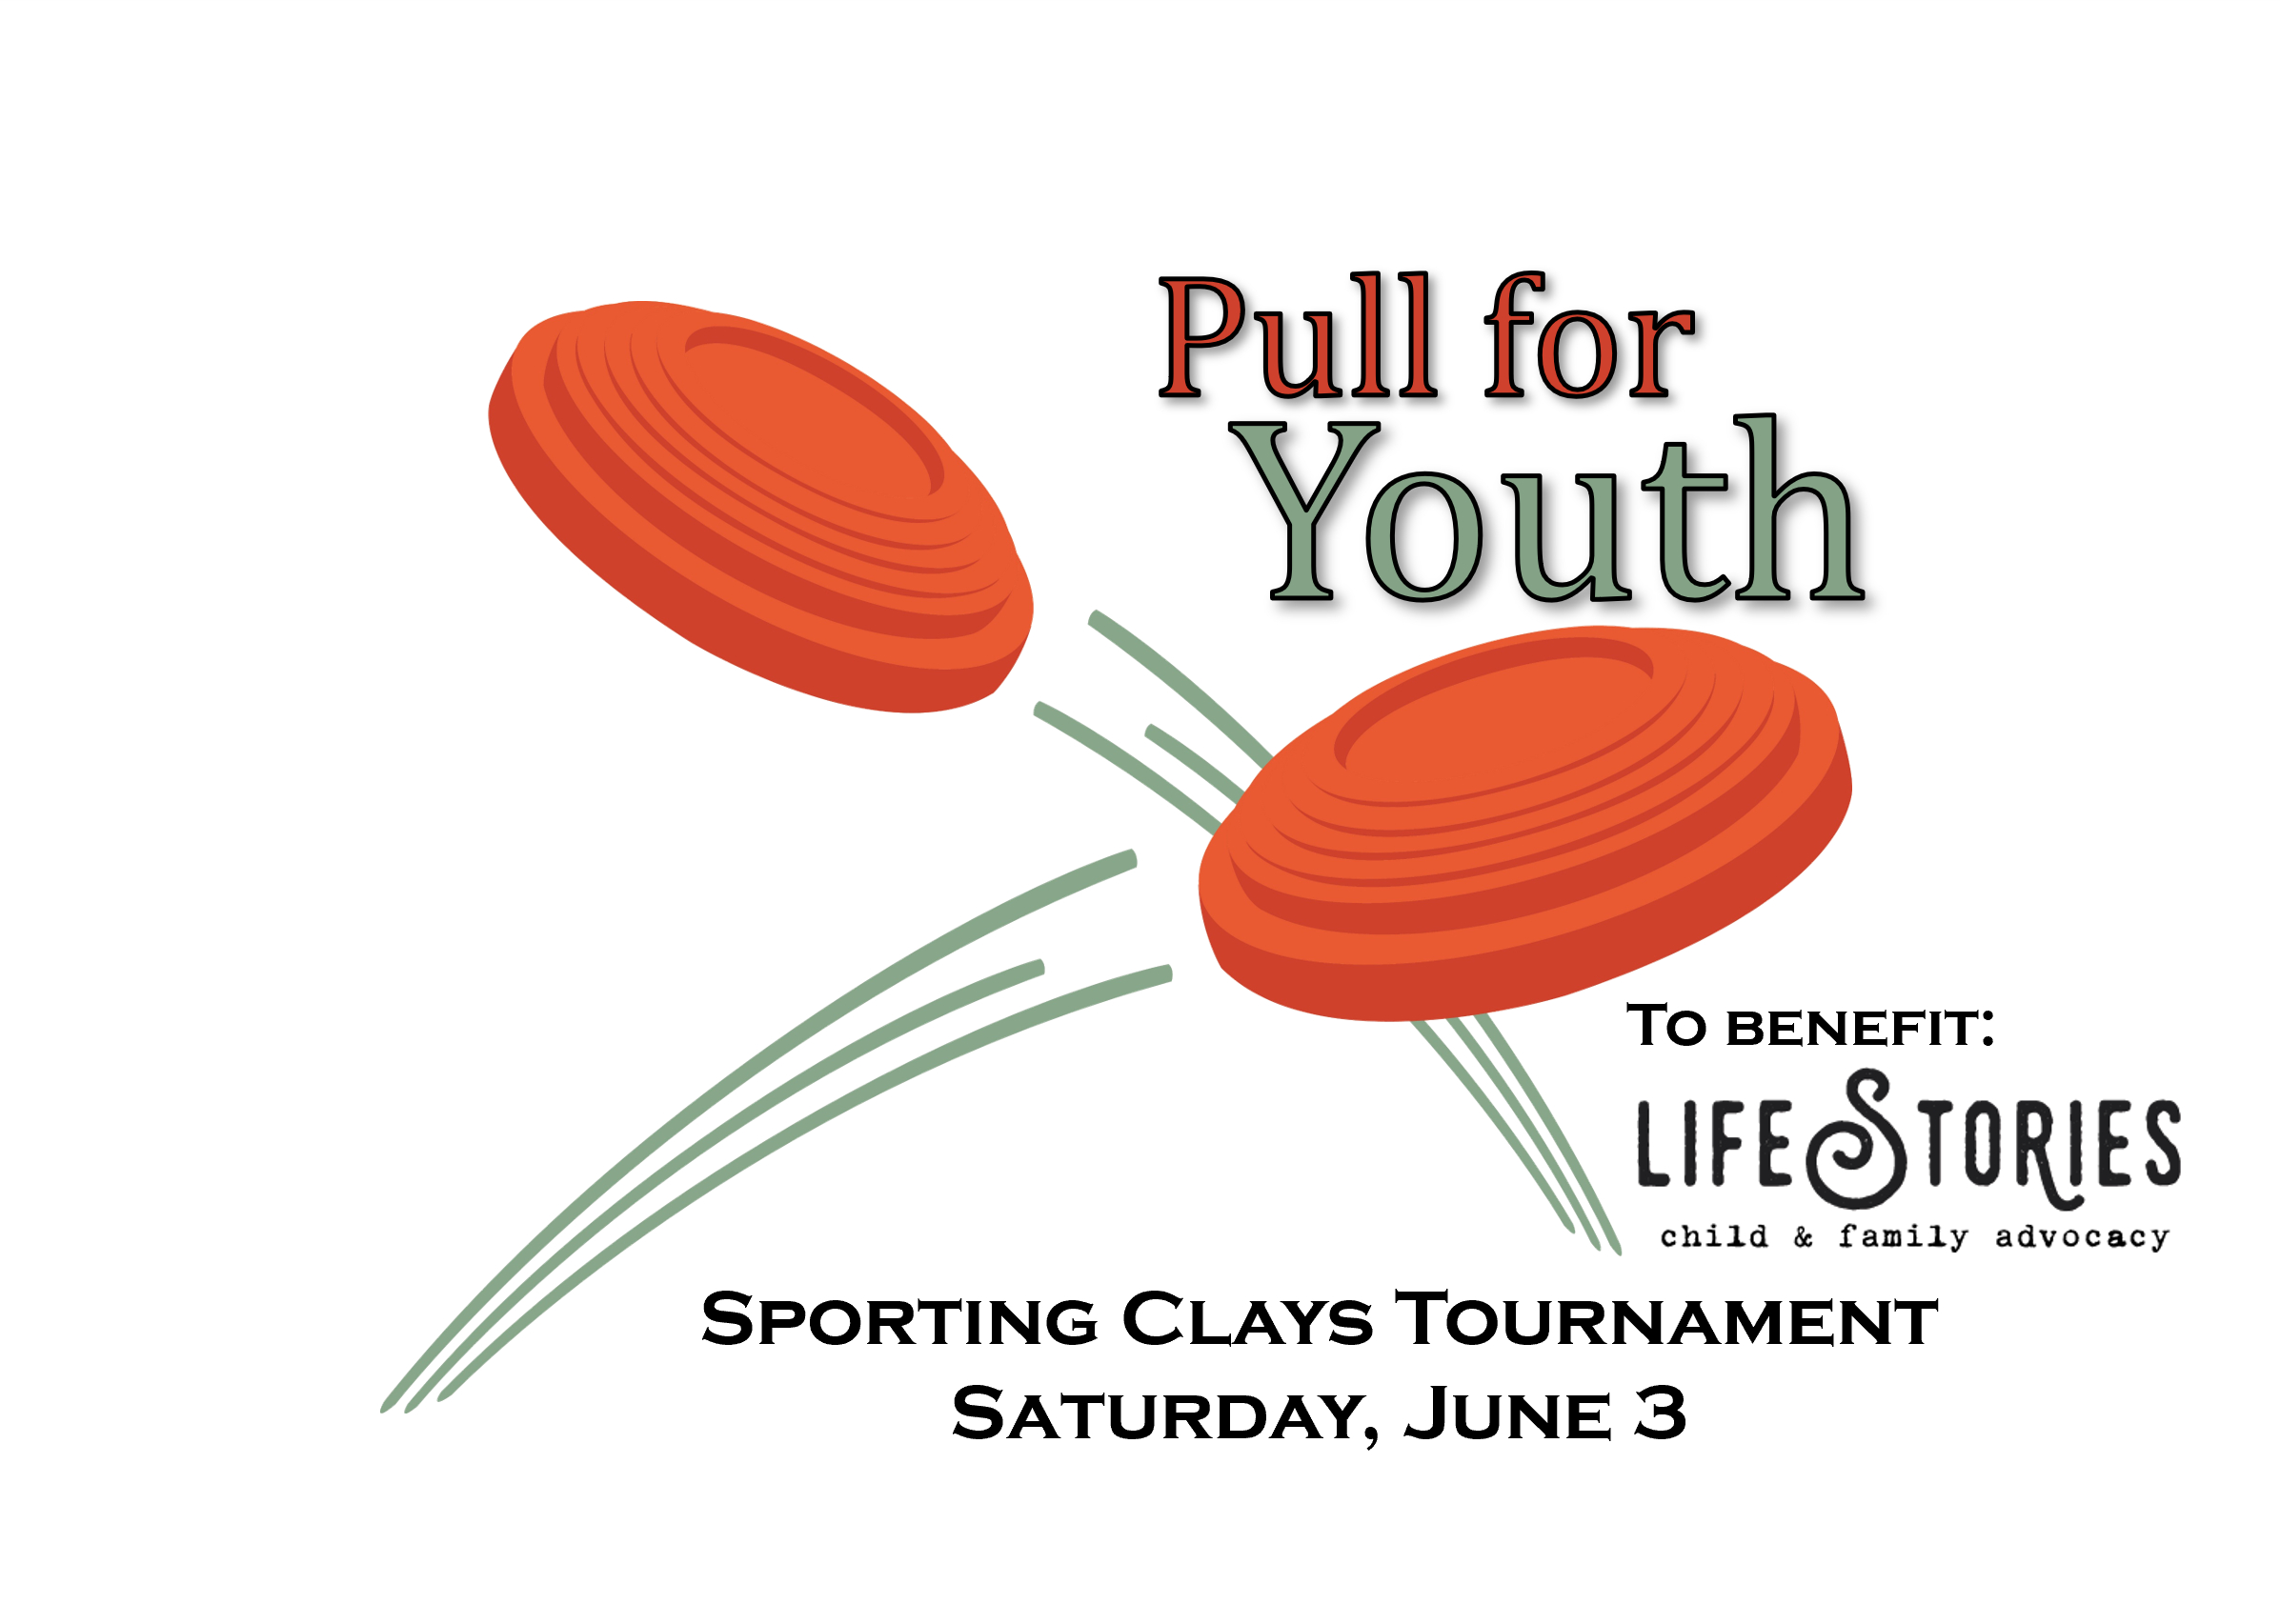 Pull for Youth